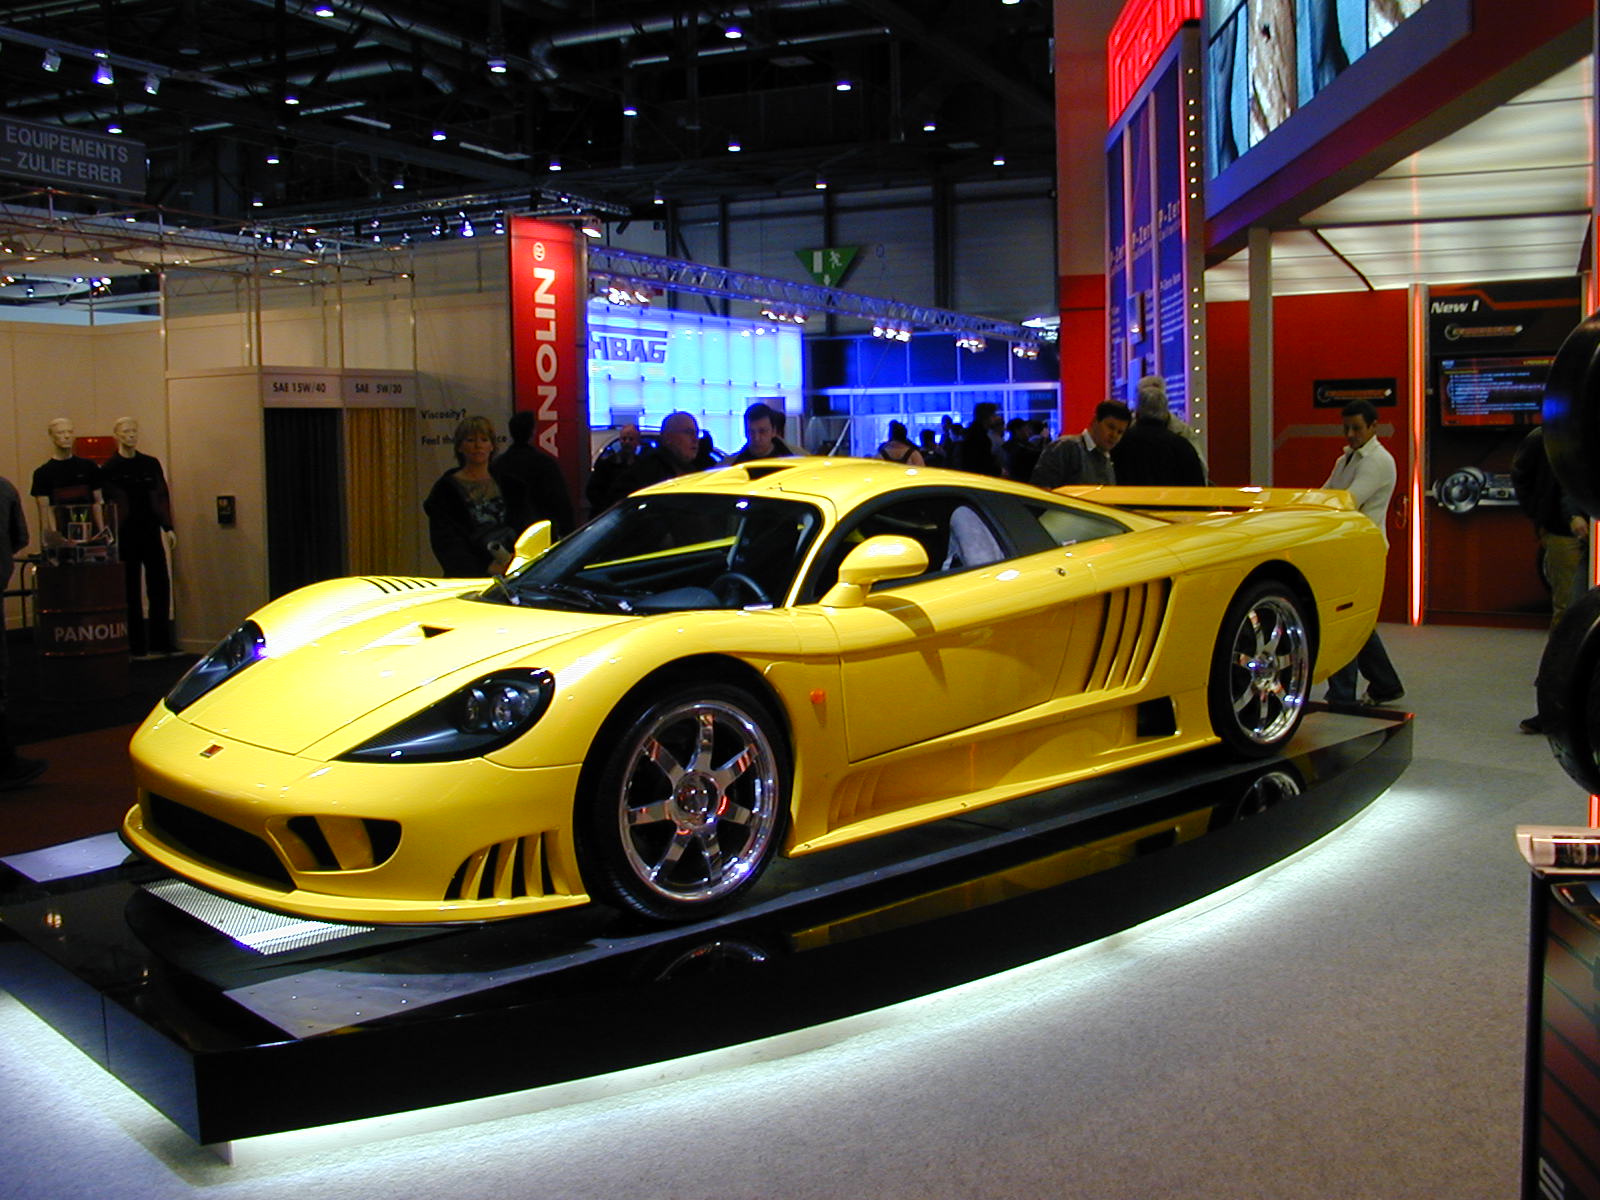 HQ Saleen Wallpapers | File 285.55Kb